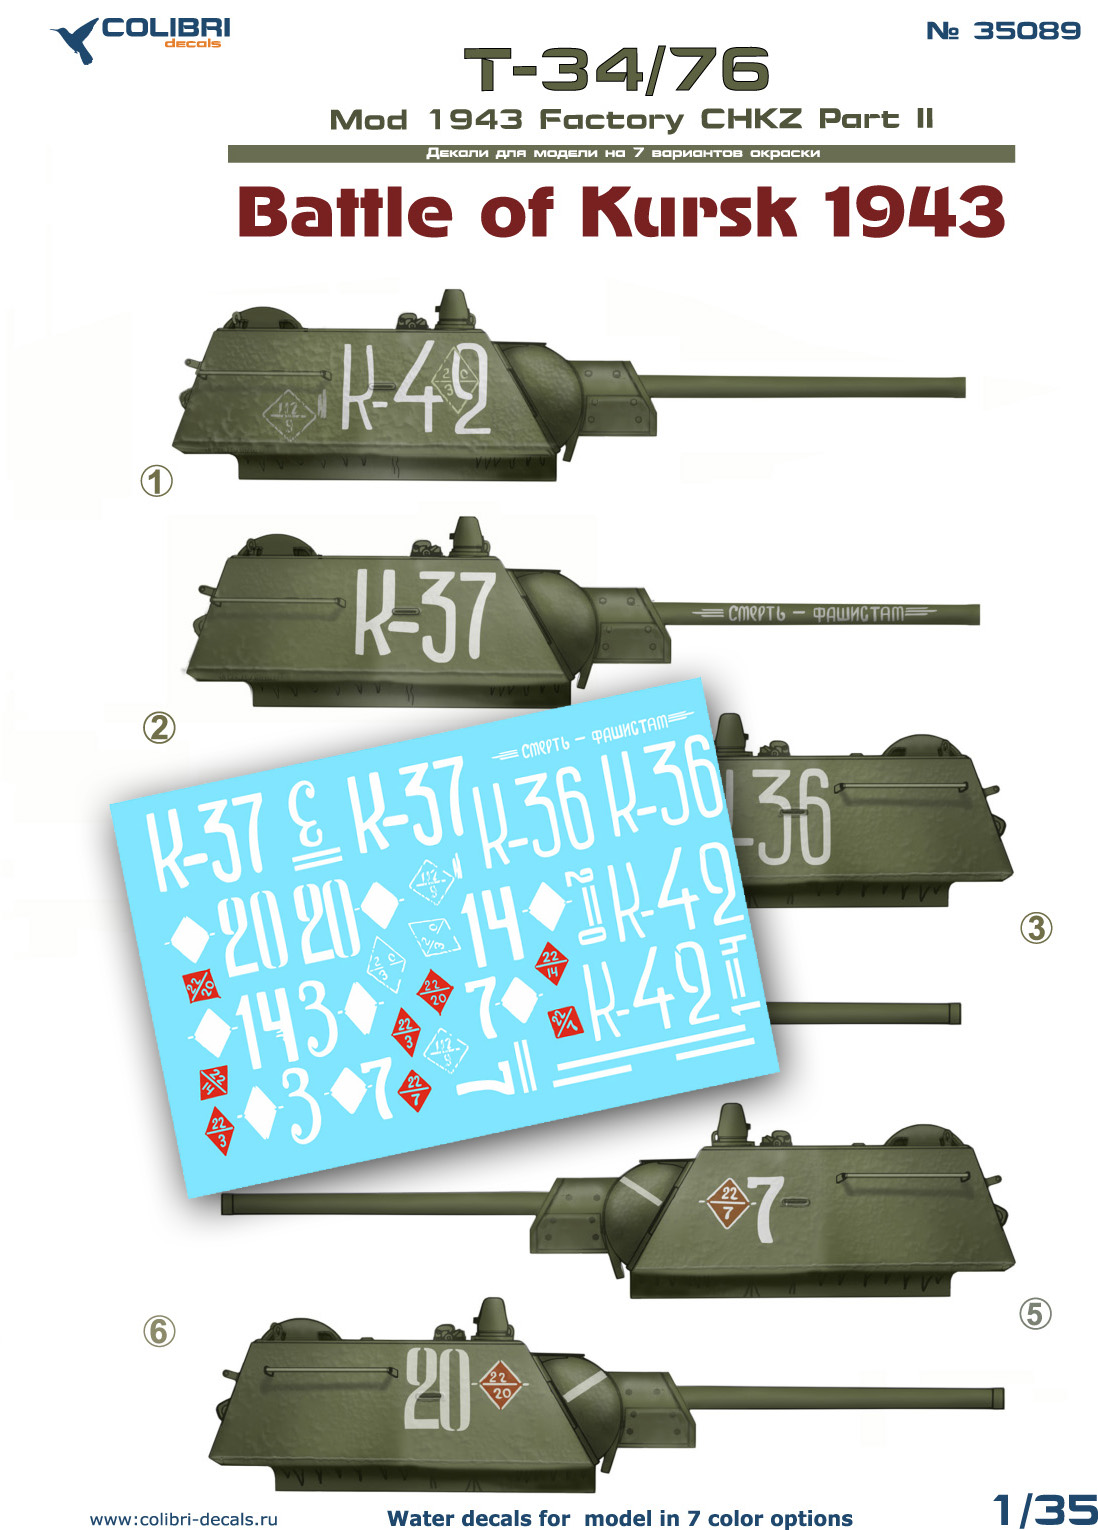 Decal 1/35 Т-34/76 мod 1943 Factory CHKZ Part II Battle of Kursk 1943 (Colibri Decals)